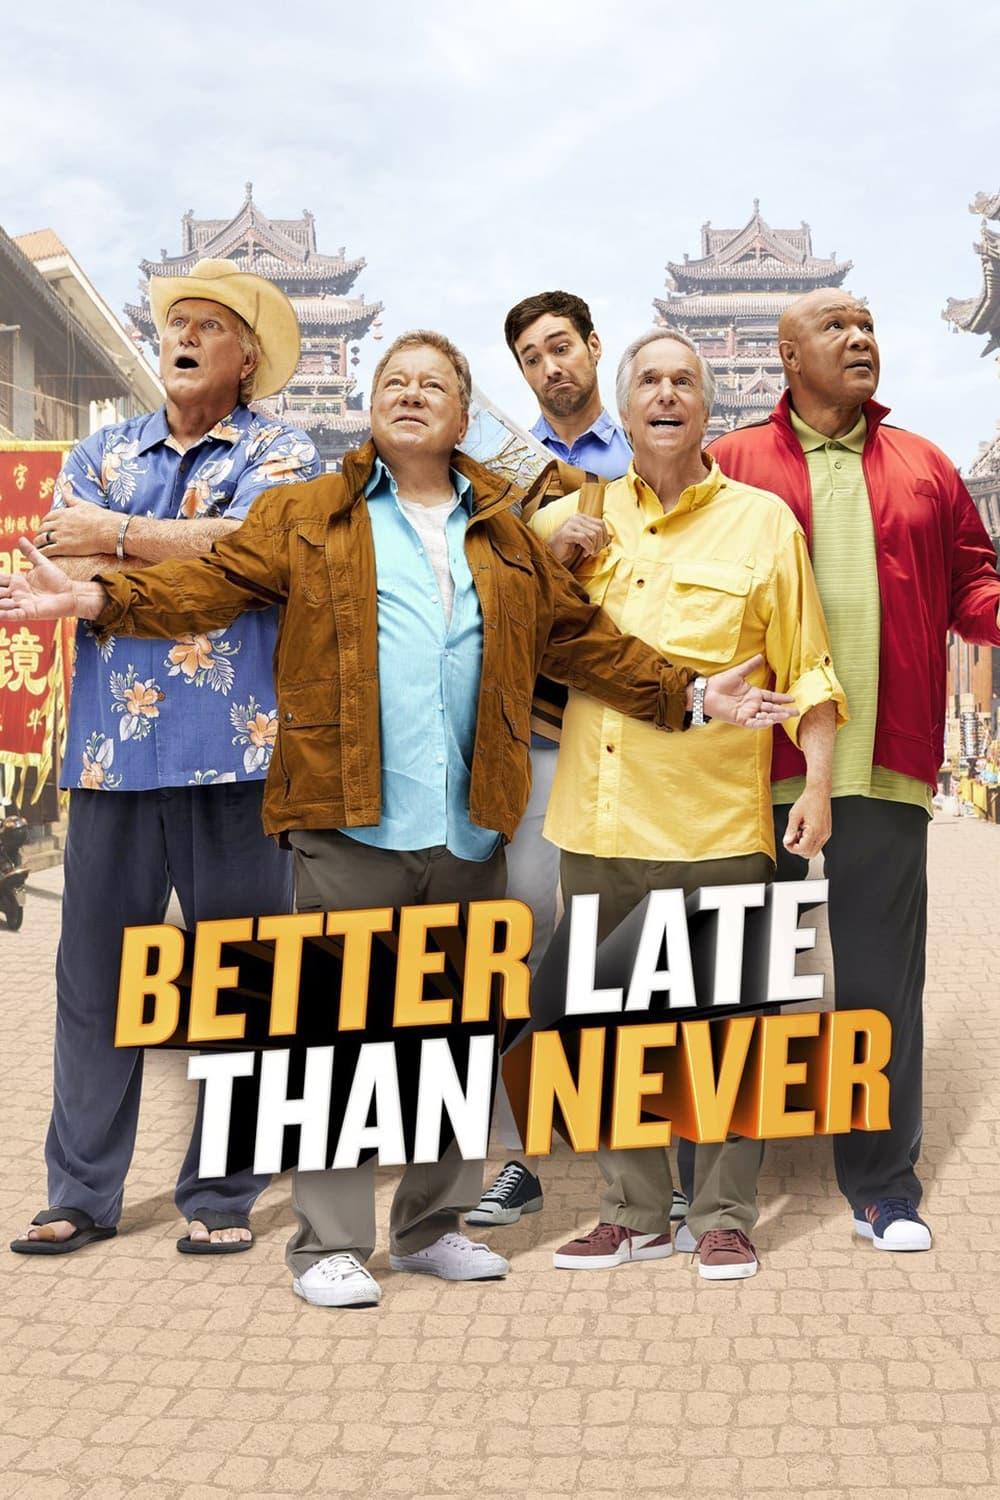 Better Late Than Never poster